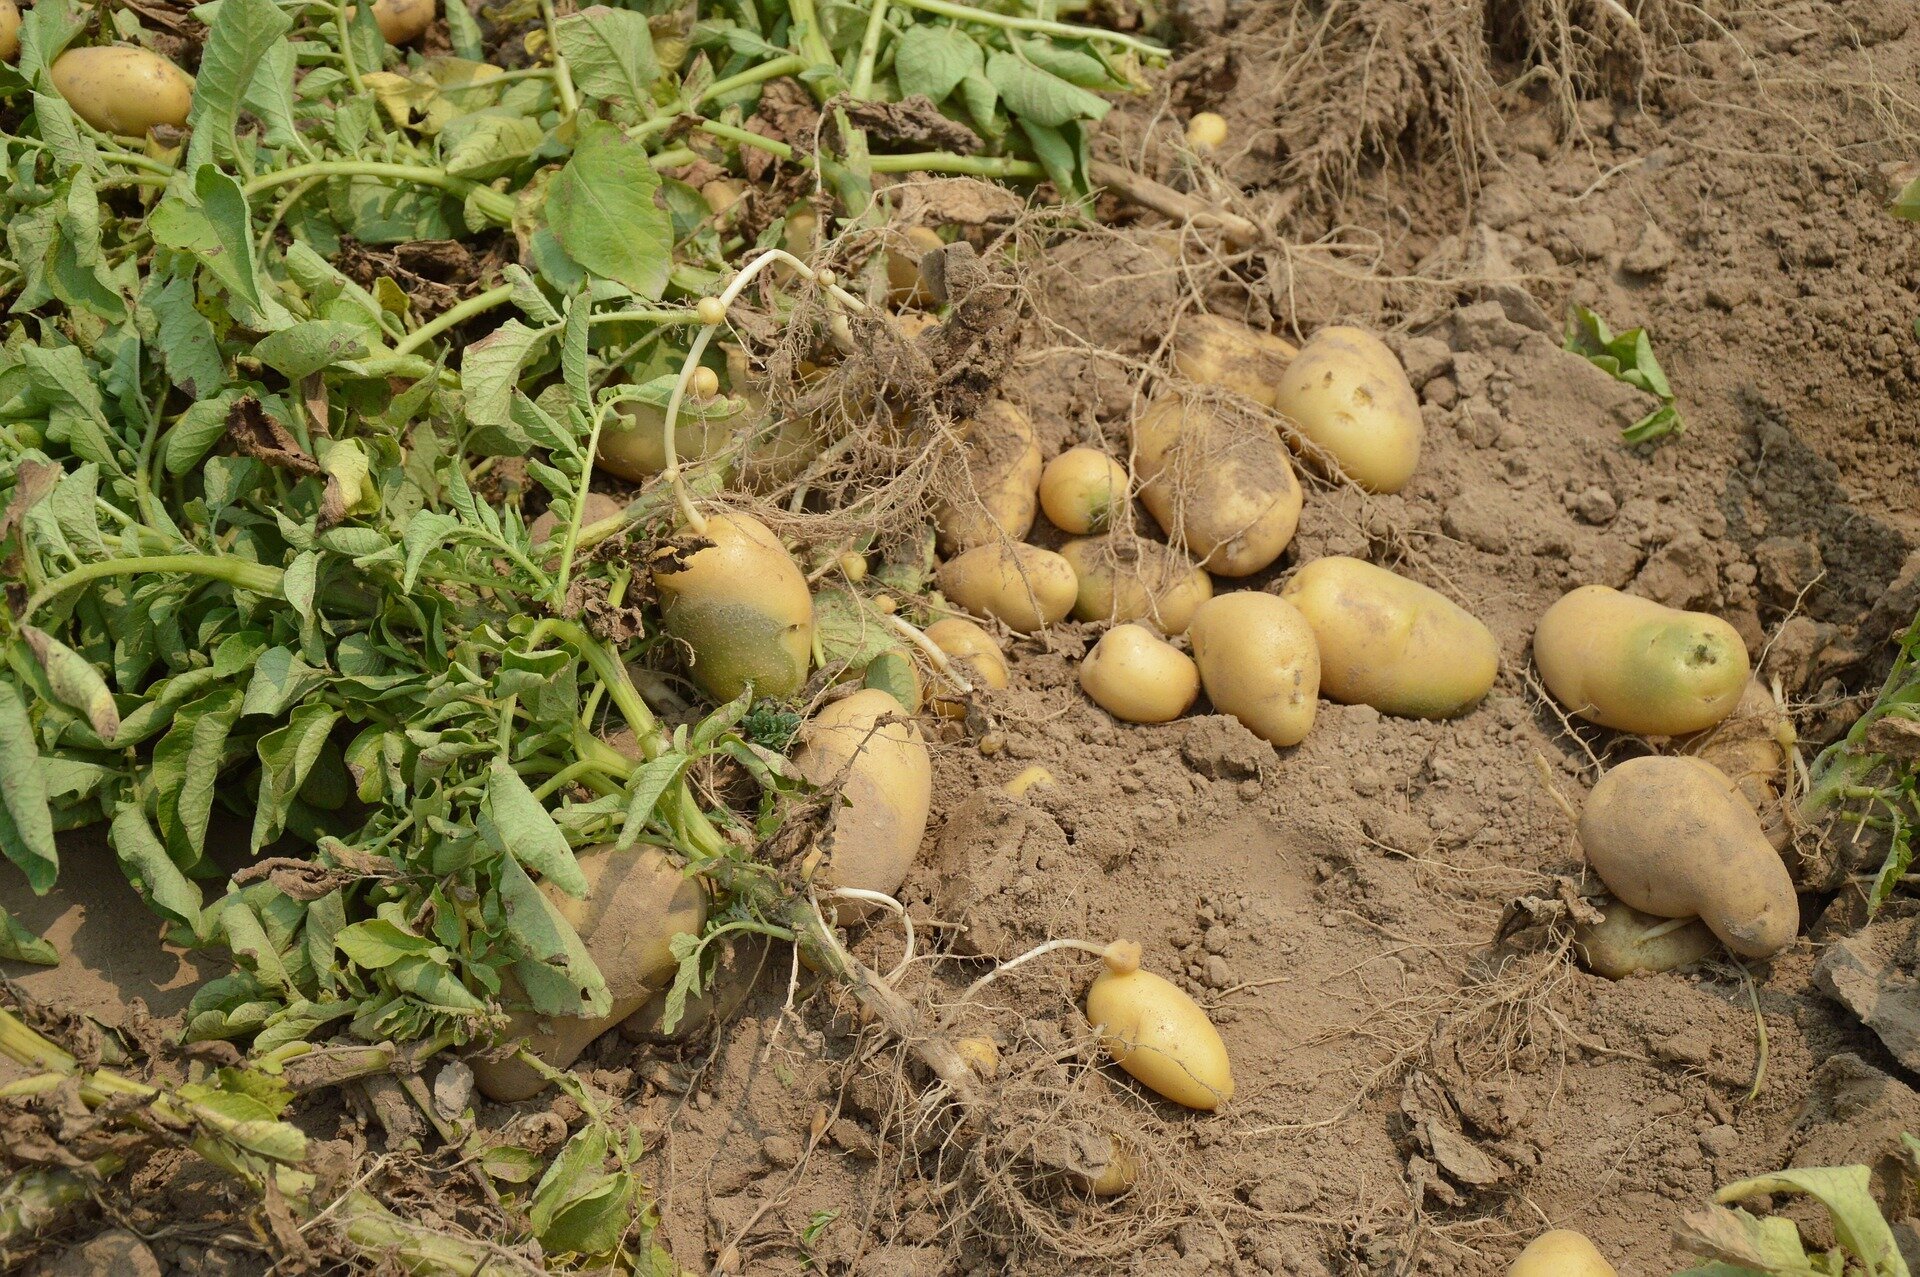 Unraveling the origin and global spread of the potato blight pathogen